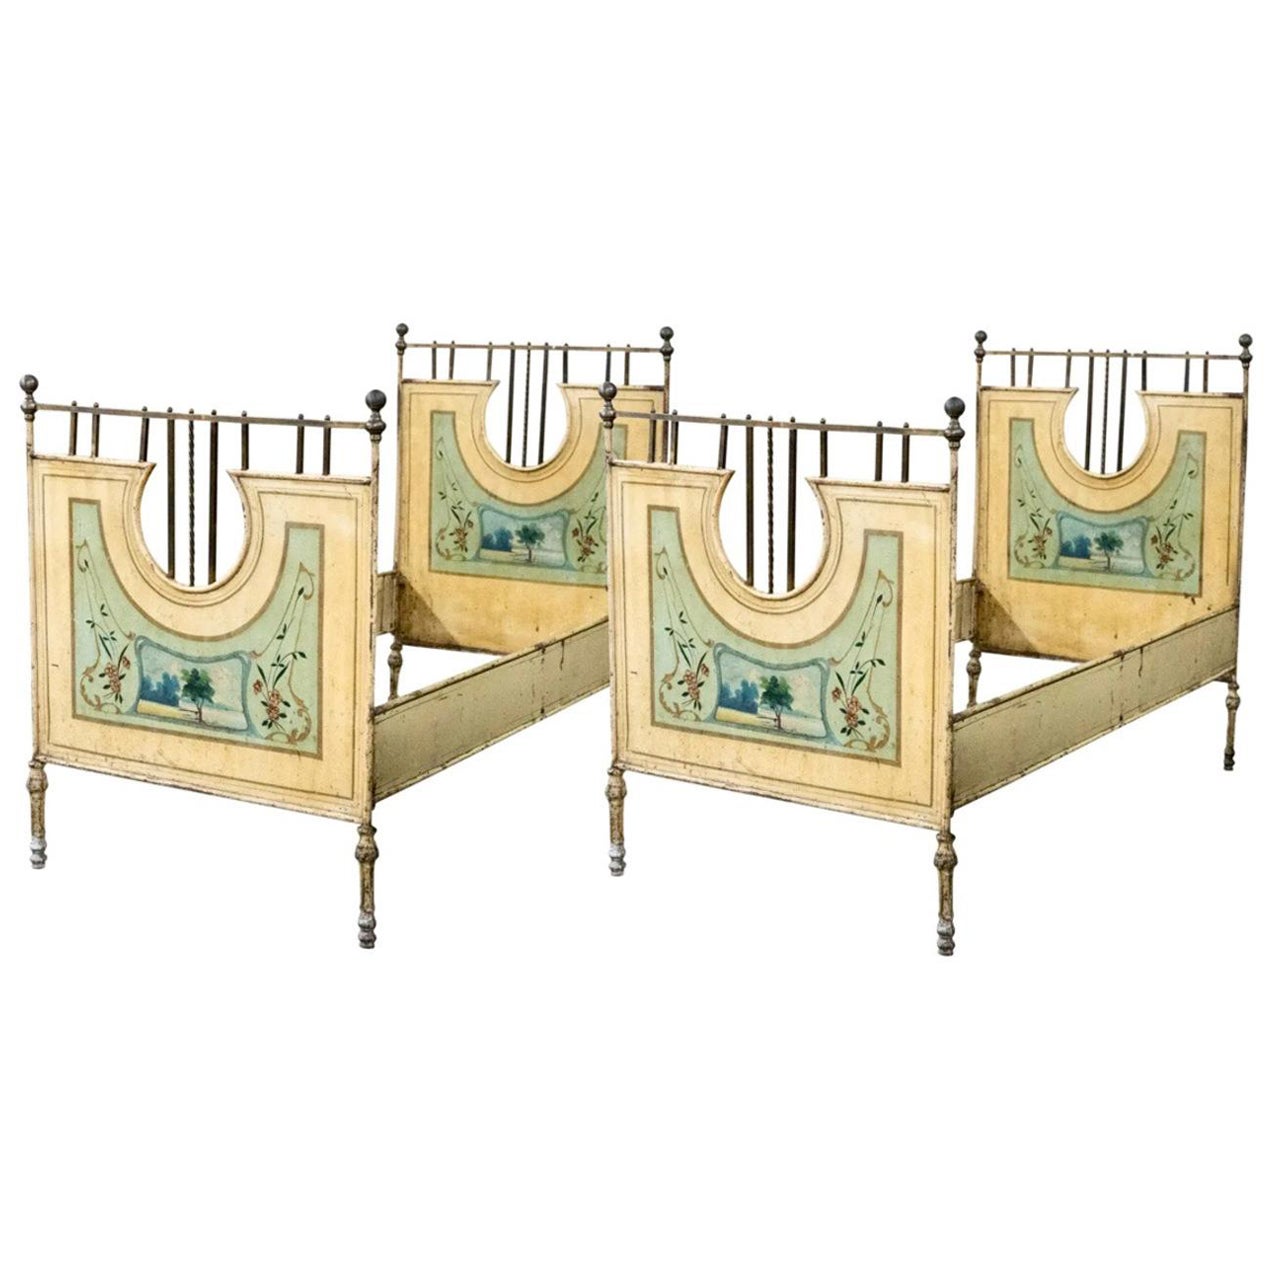 Pair Painted Tole Beds, Late 19th c.